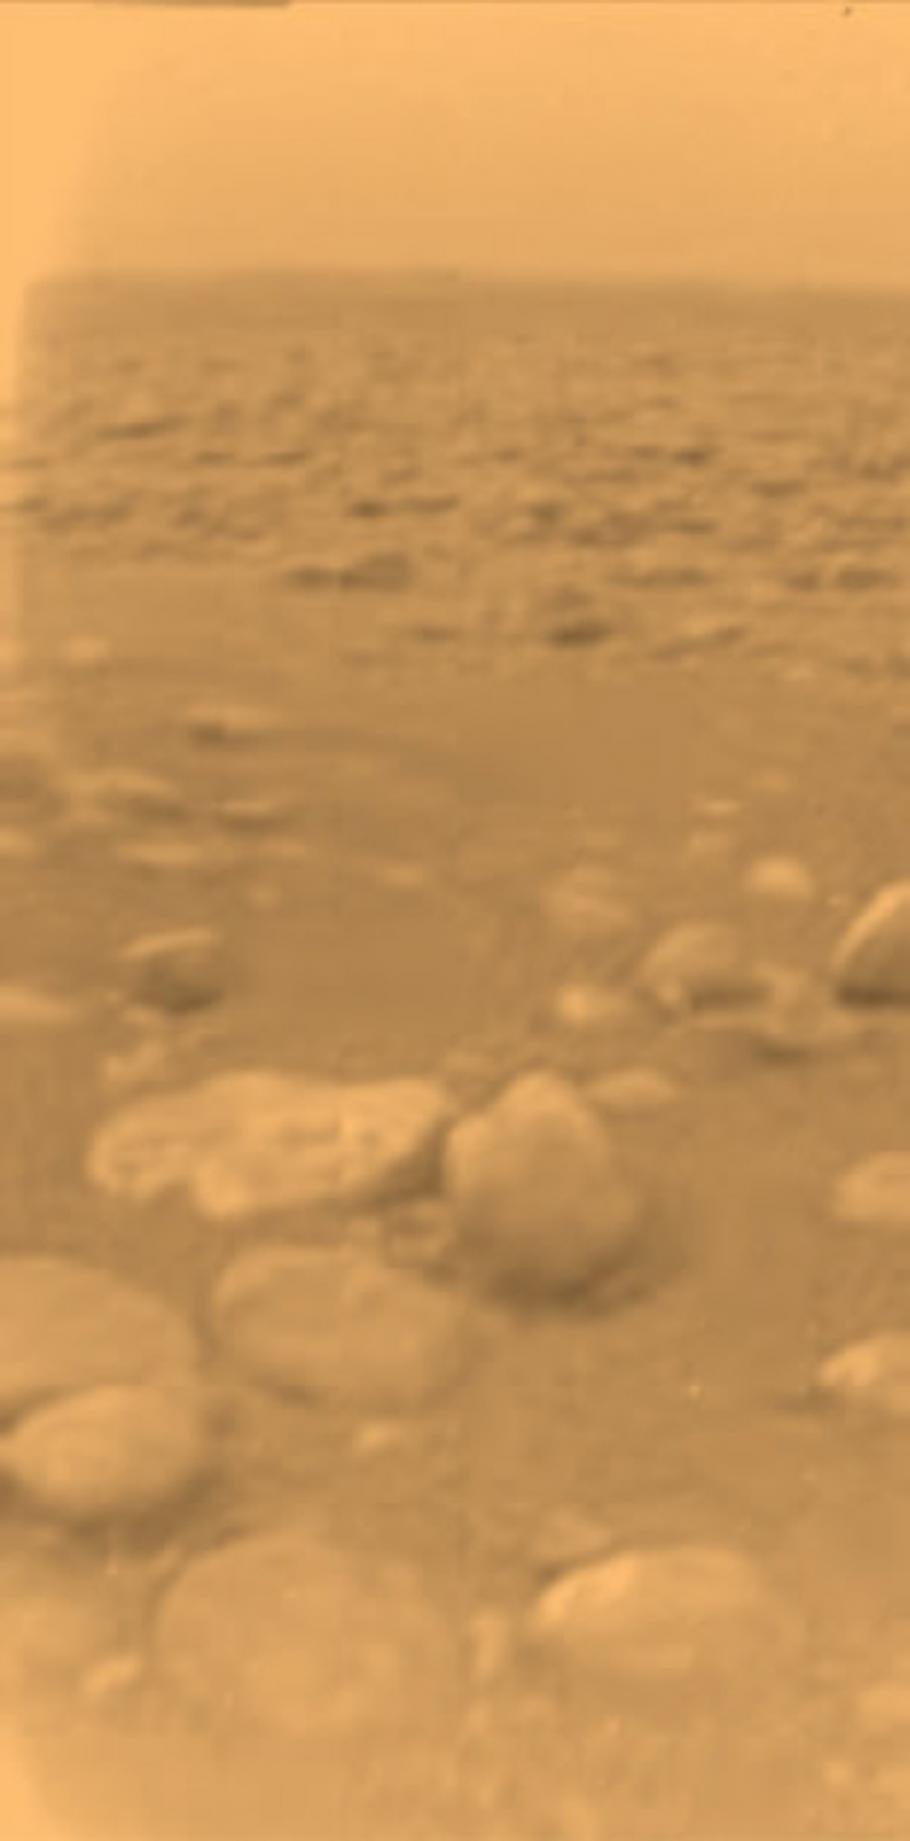 View of a part of the surface of Titan, a moon orbiting Saturn. The visible surface is rocky and is very uneven.